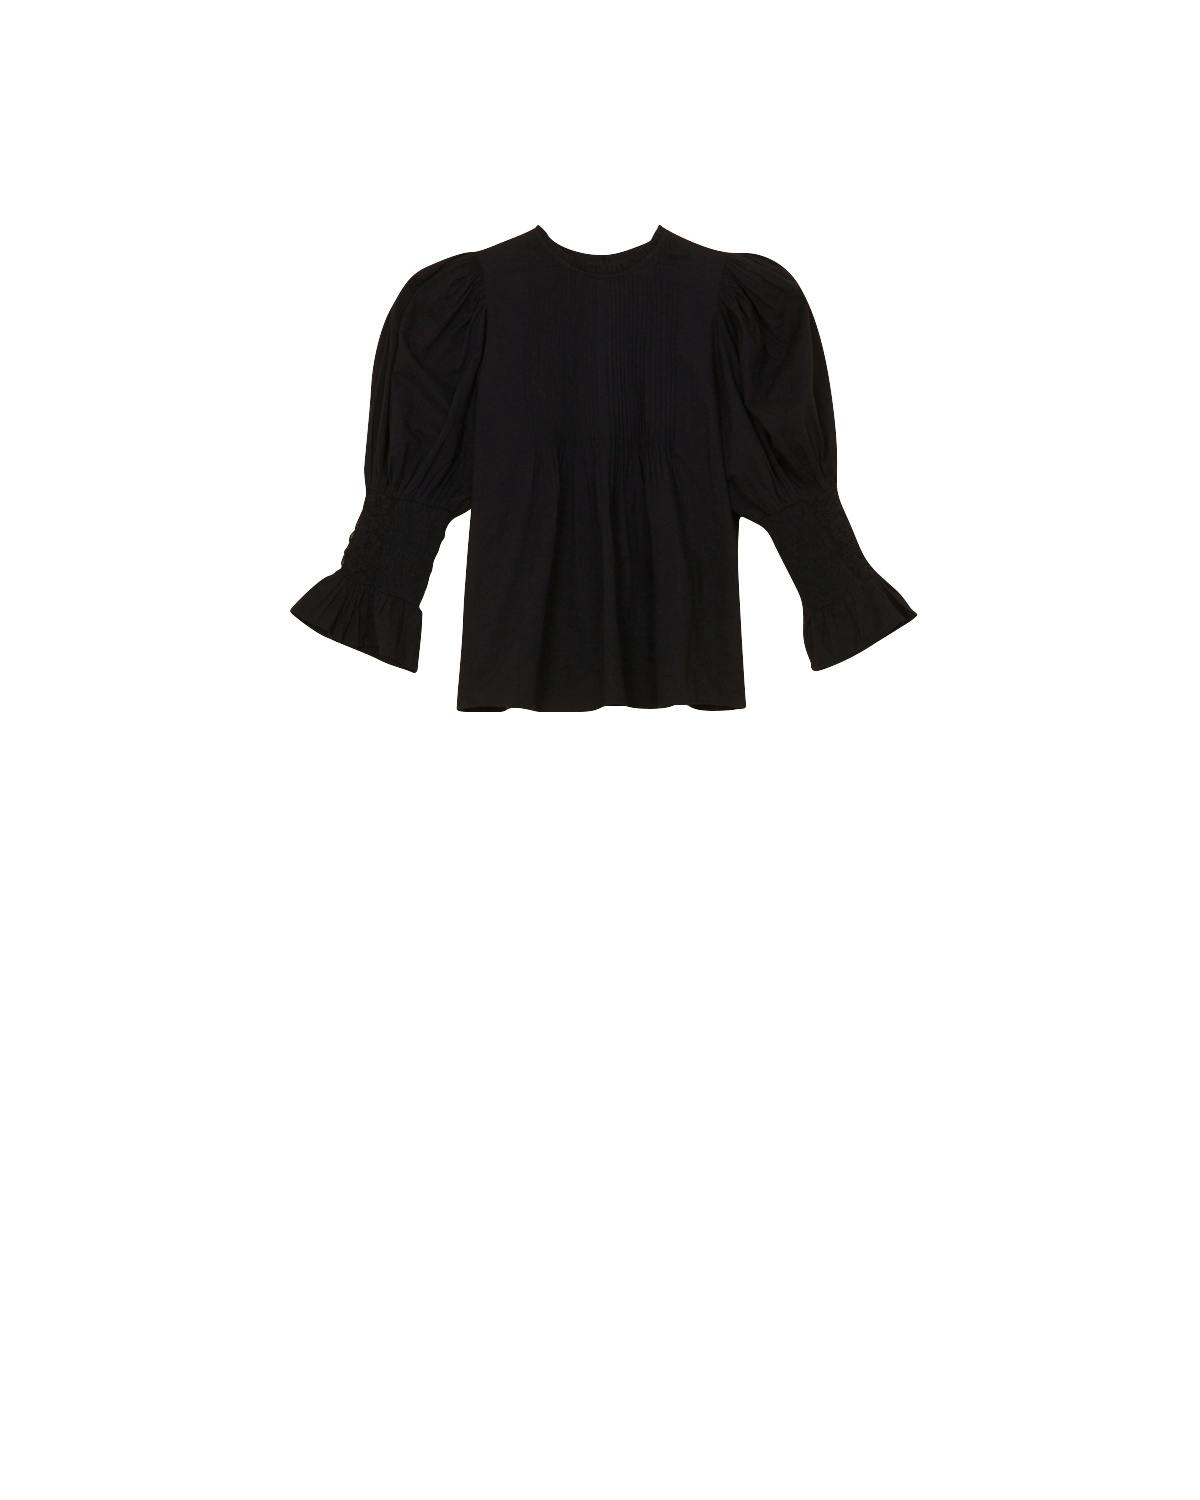 Broderie Anglaise Blouse, Black. Image #6